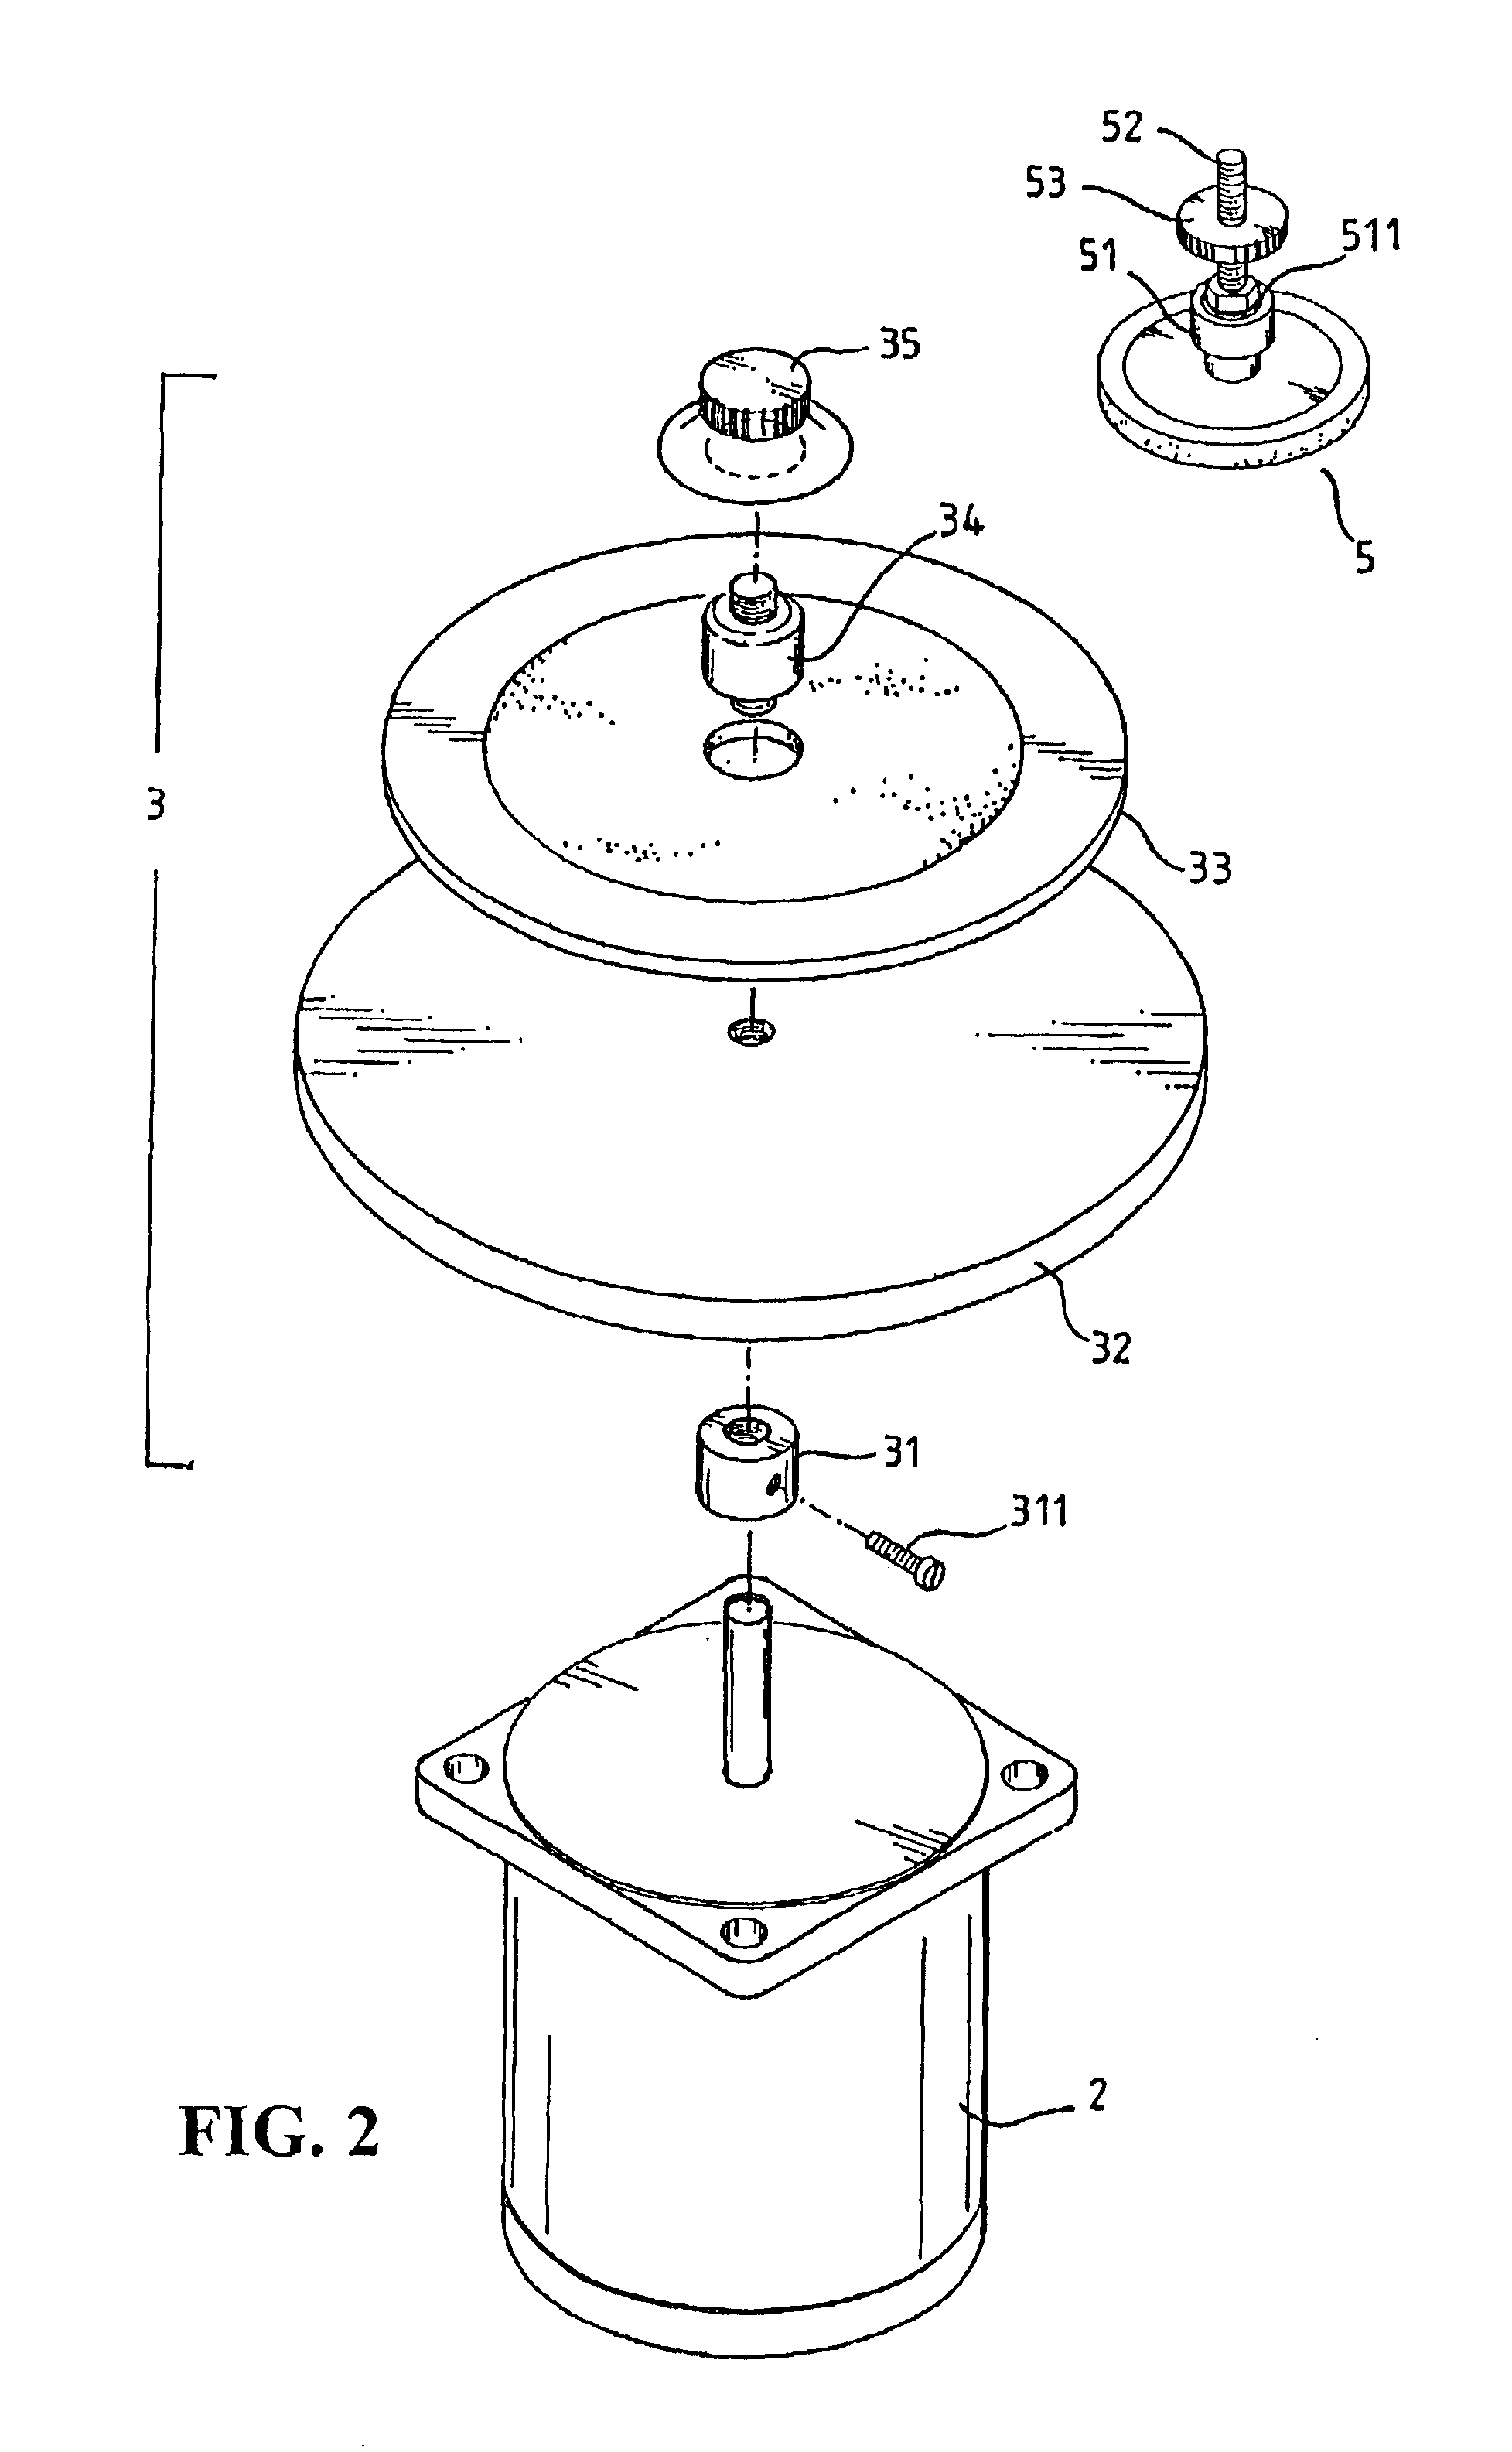 Structure for a polishing machine of an optical disk